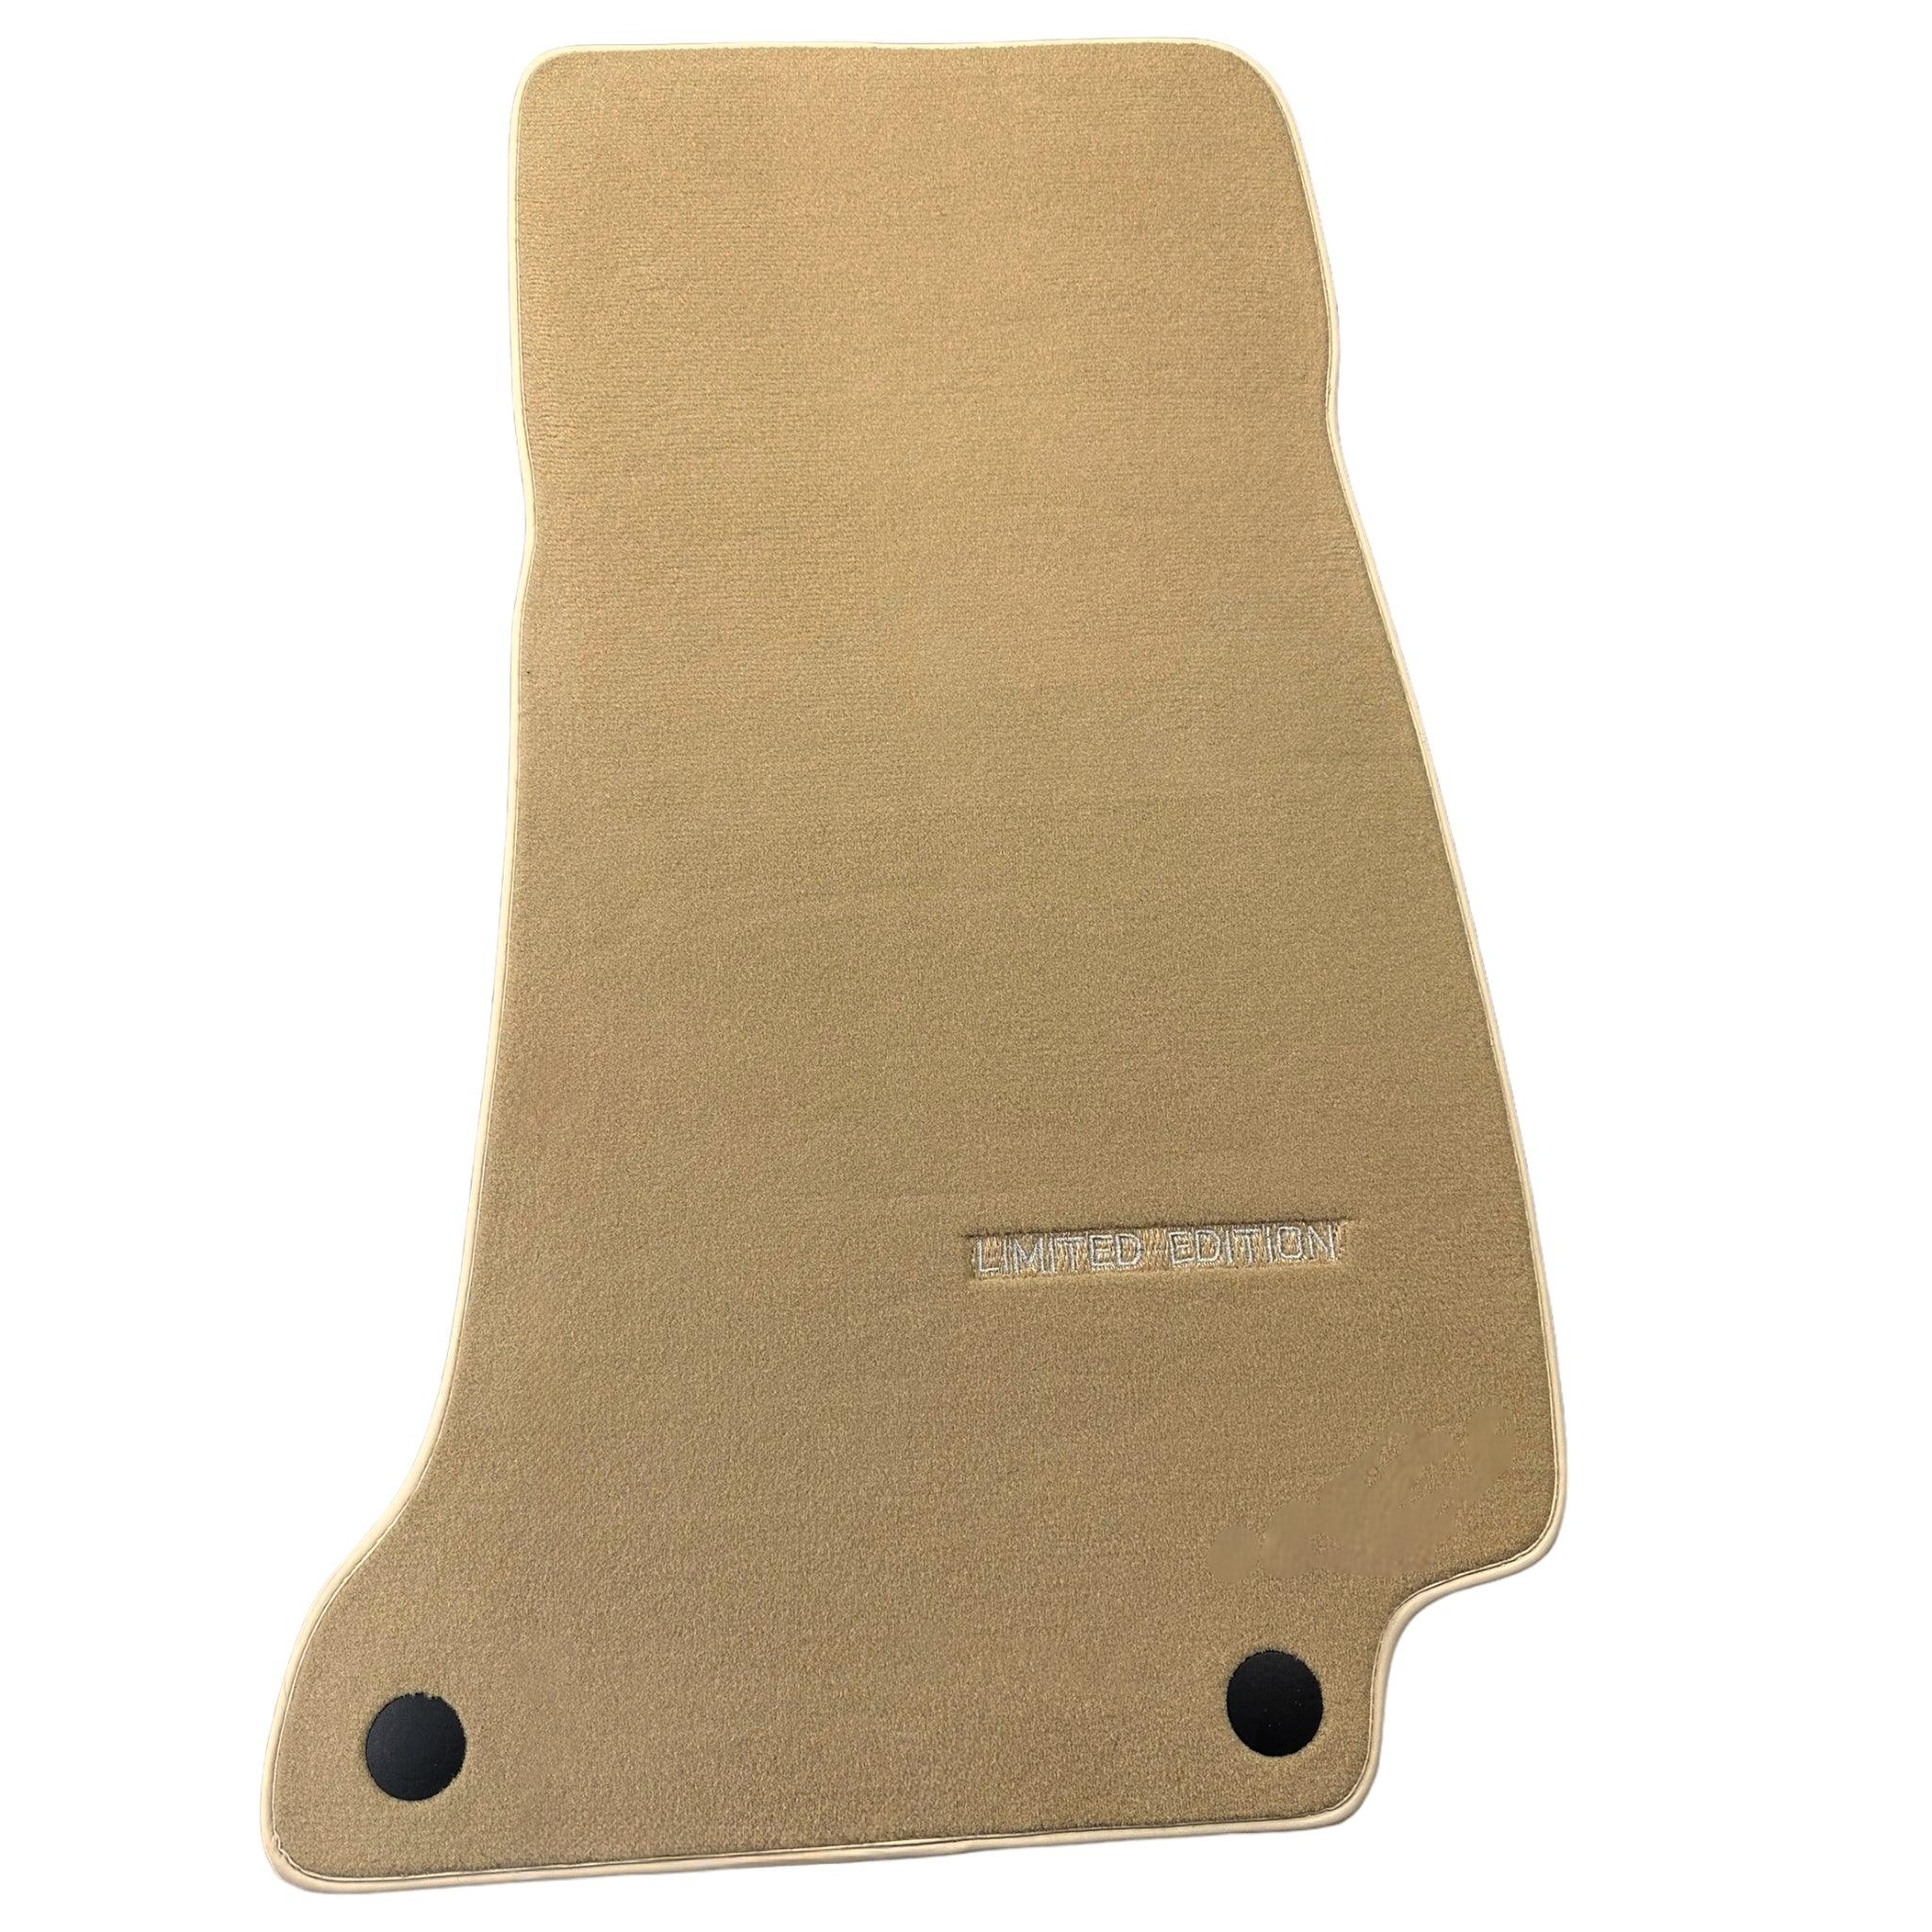 Beige Floor Mats For Mercedes Benz E-Class C207 Coupe (2009-2013) | Limited Edition